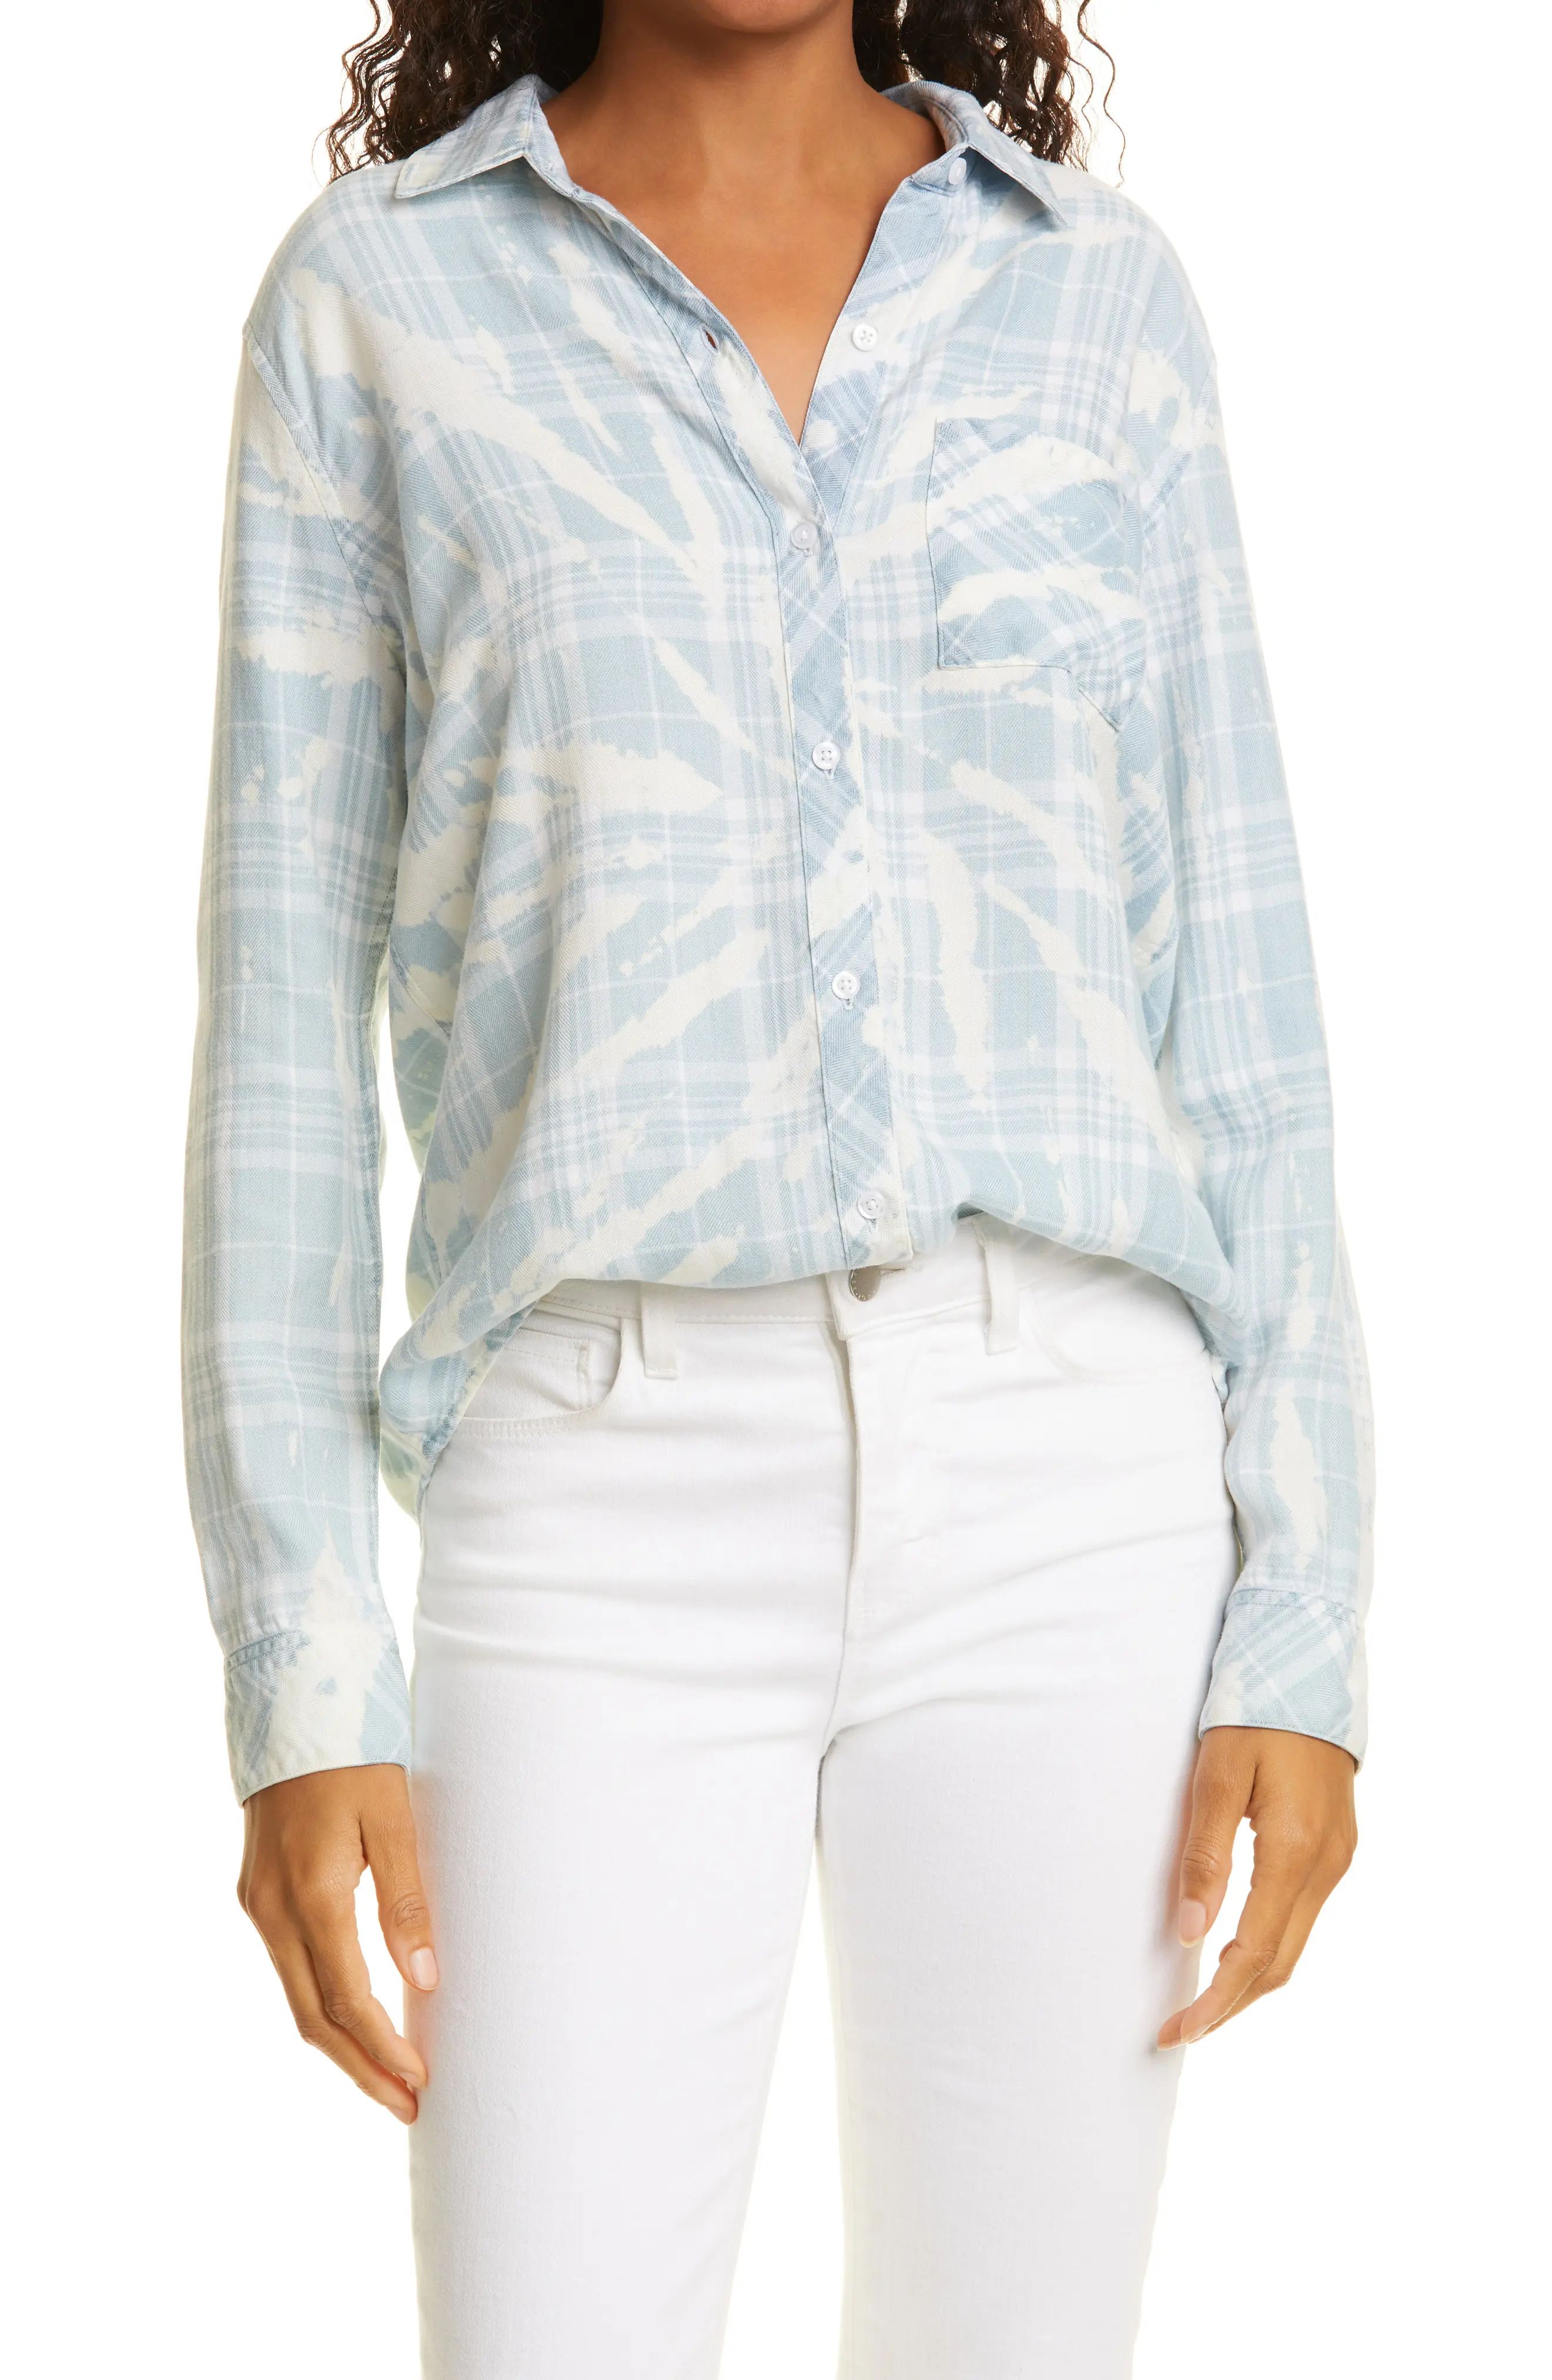 Rails Hunter Plaid Tie Dye Button-Up Shirt in Indigo Bleached Swirl at Nordstrom, Size Small | Nordstrom